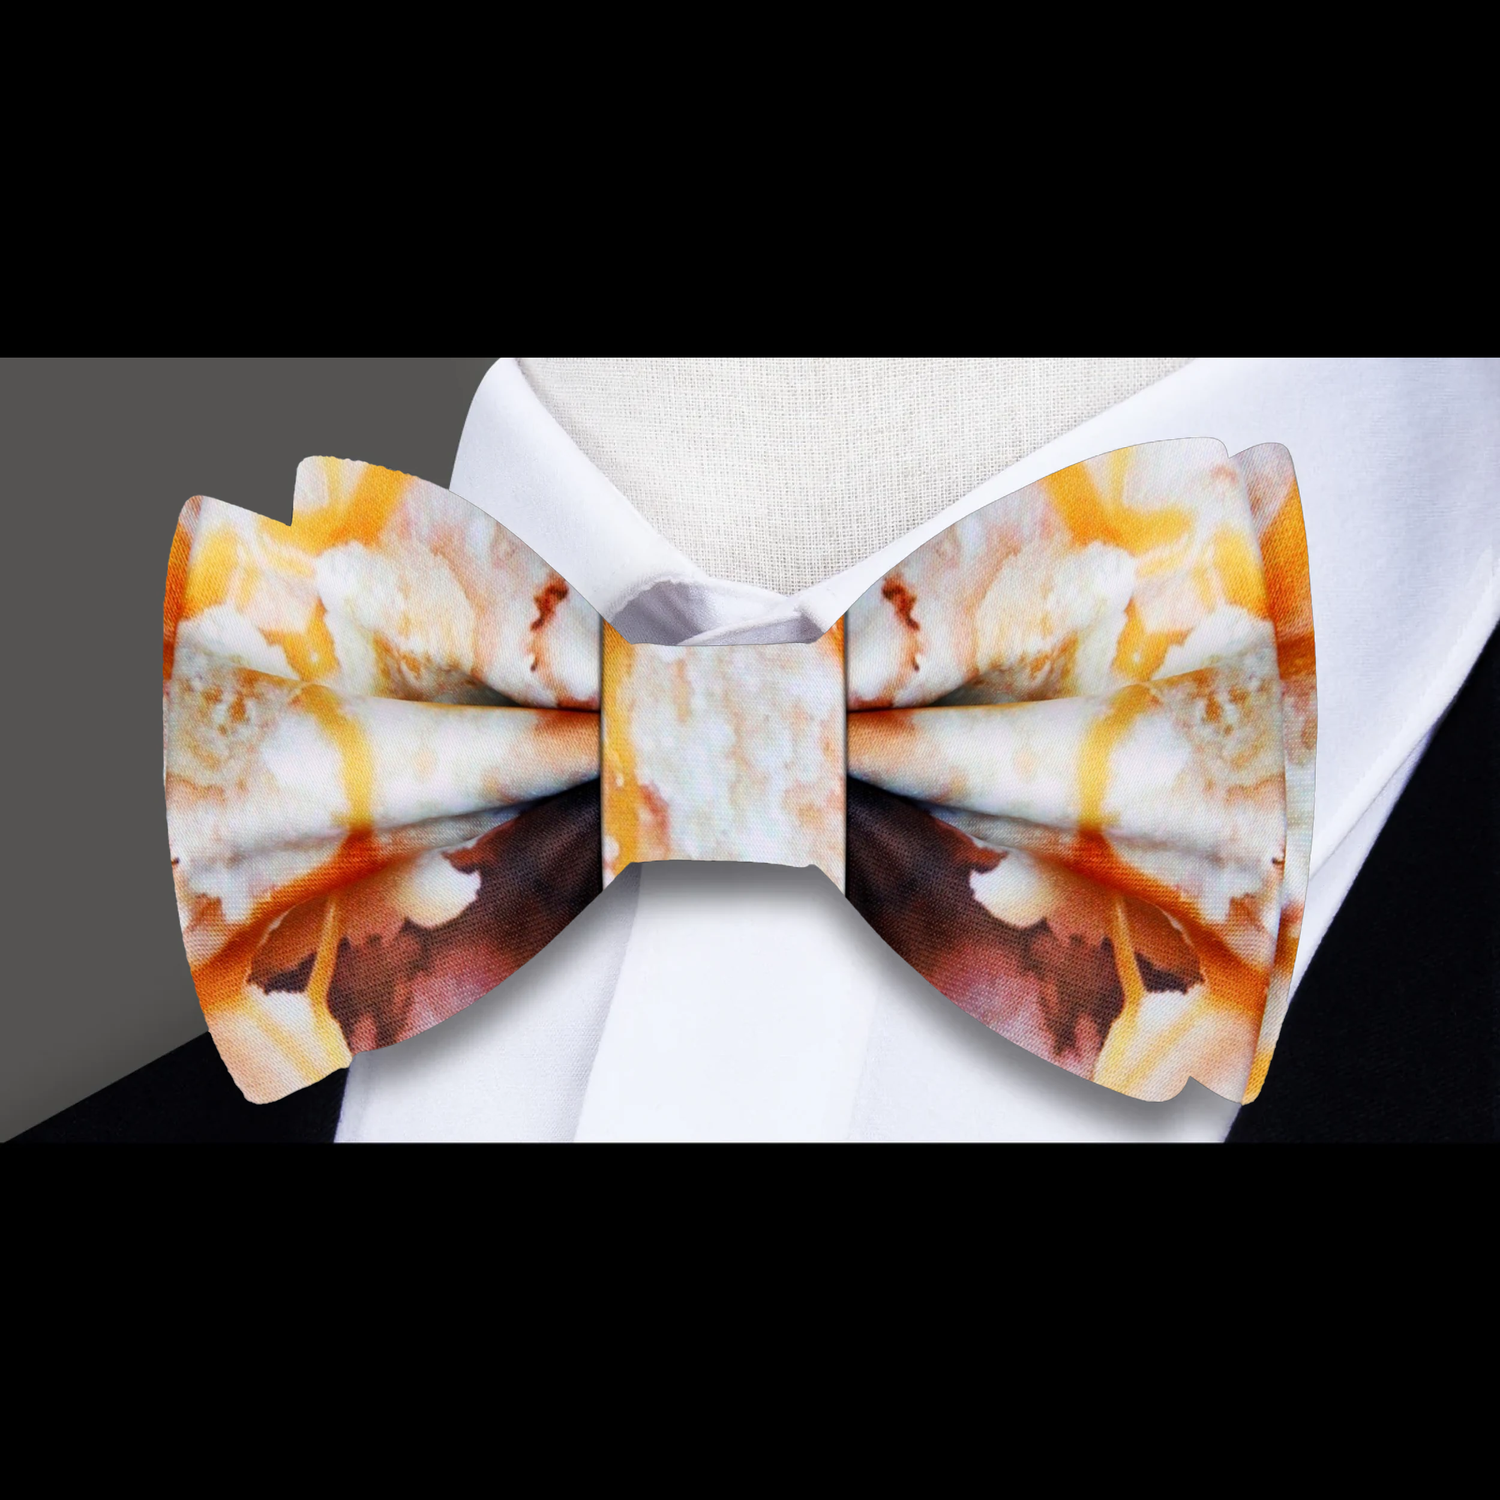 Vanilla Ice Cream With Salted Caramel Drizzle Bow Tie 